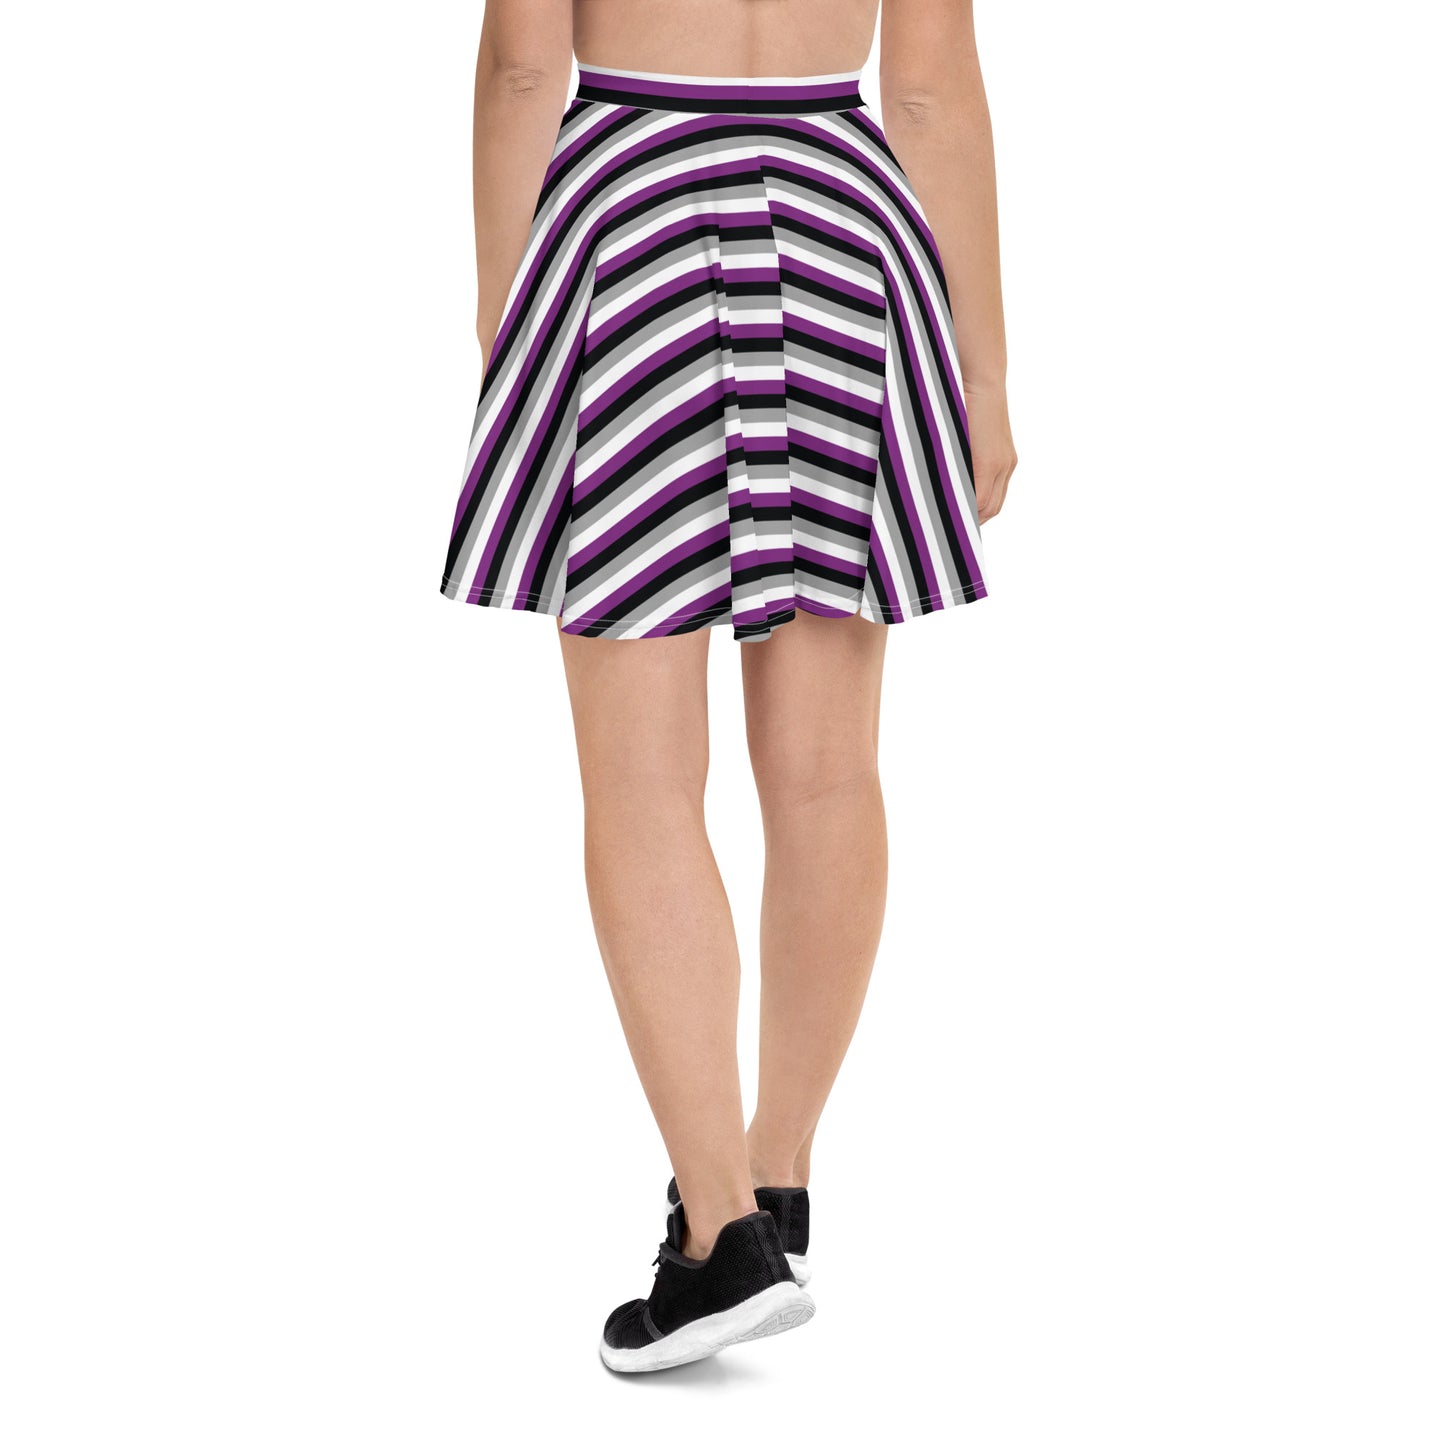 Asexual Pride Skater Skirt - LGBTQIA Black, Gray, Purple, and White Flag Flared Skirt - Parade Club Vacation Running